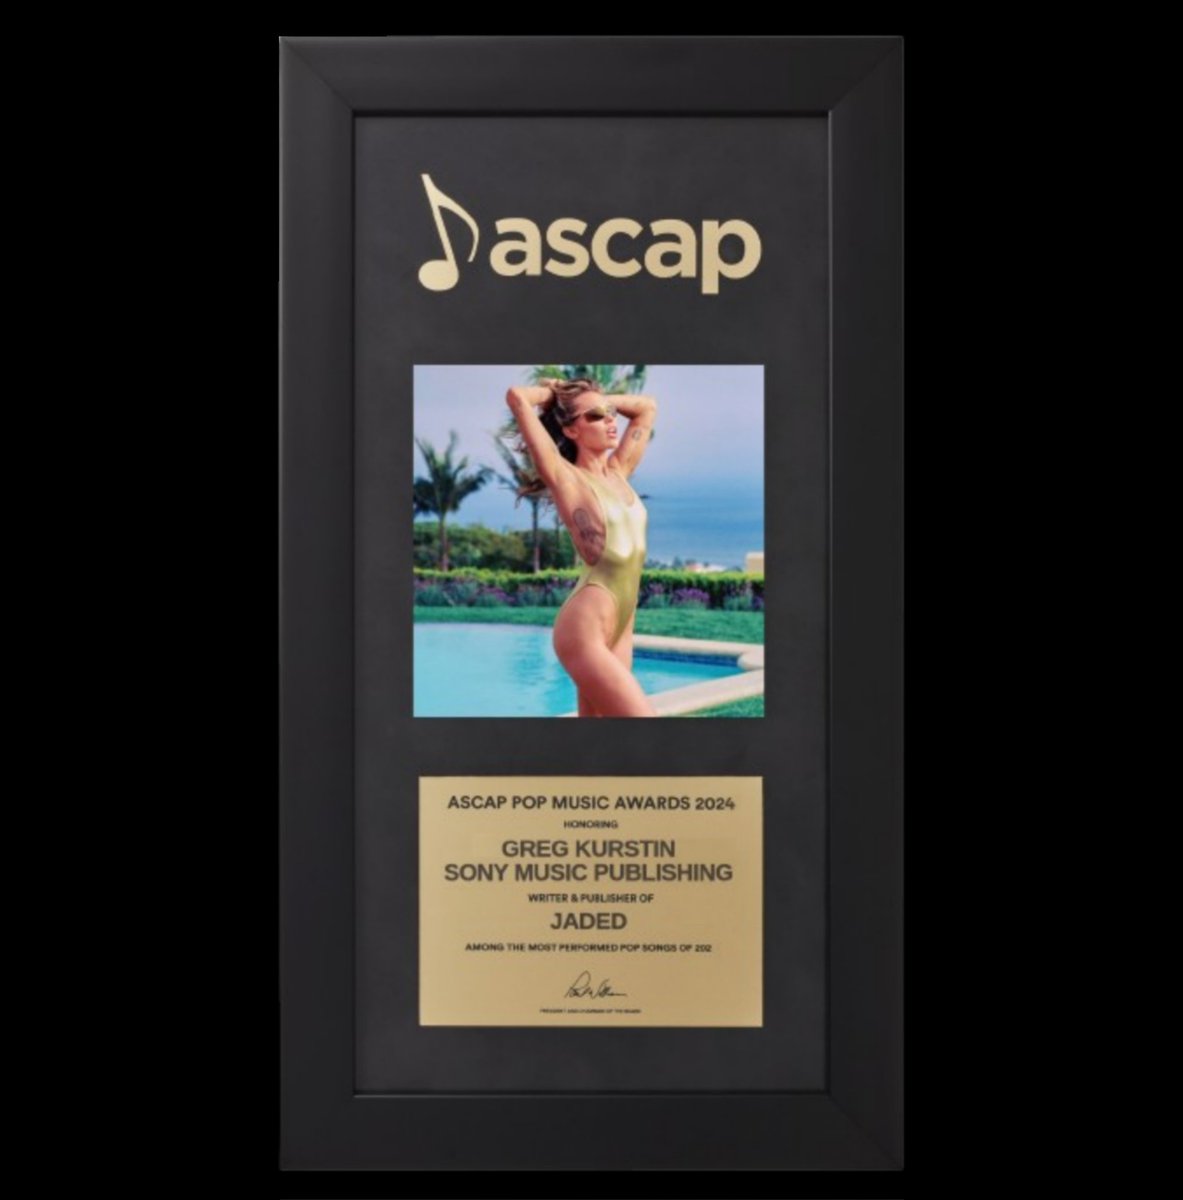 “JADED” by Miley Cyrus has won an ASCAP award. —The American Society of Composers, Authors and Publishers.